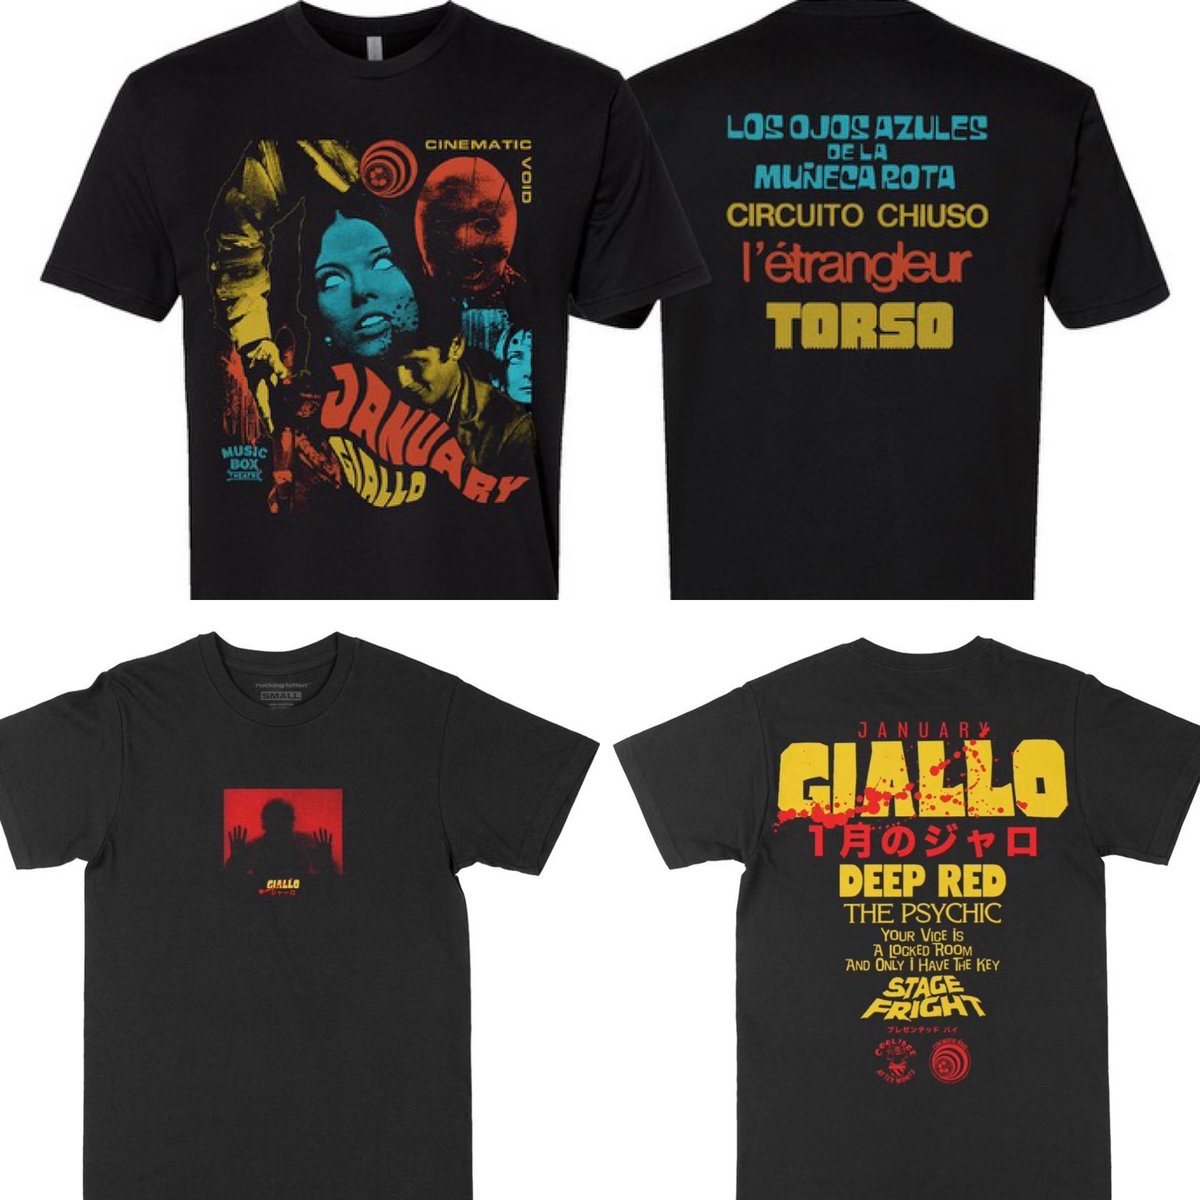 If you’re attending any January Giallo events at @musicboxtheatre in Chicago or @thecoolidge / @coolidgemidnite in Brookline, MA both venues will have site specific January Giallo shirts. Music Box designed by Eagle Barber/ Coolidge designed by @Ruckingfotten